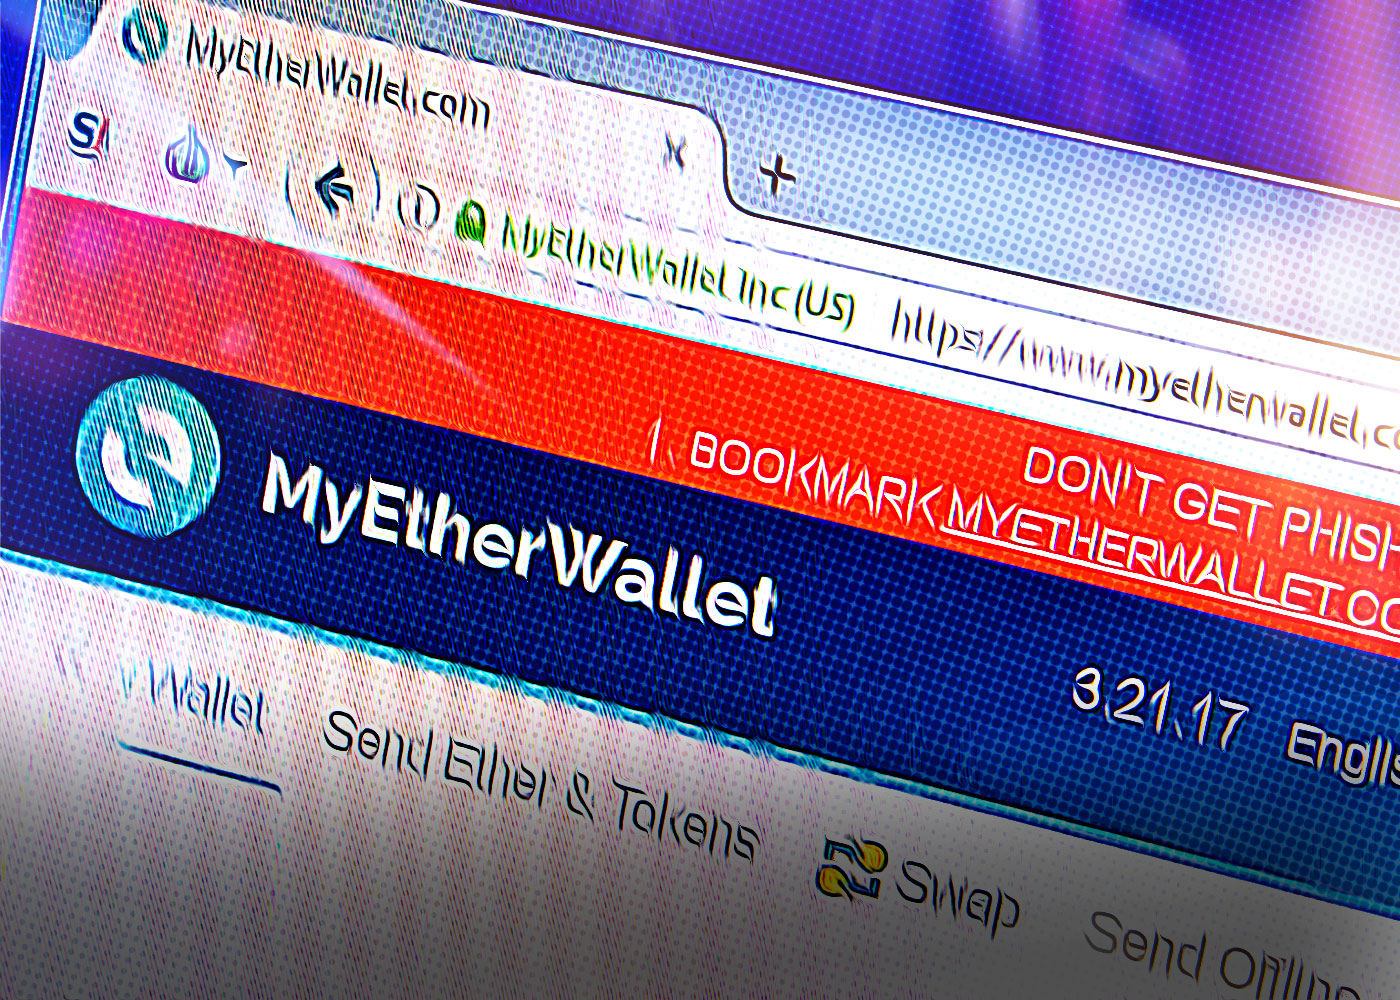 Mysterious Ether Wallet Inactive For 9 Years